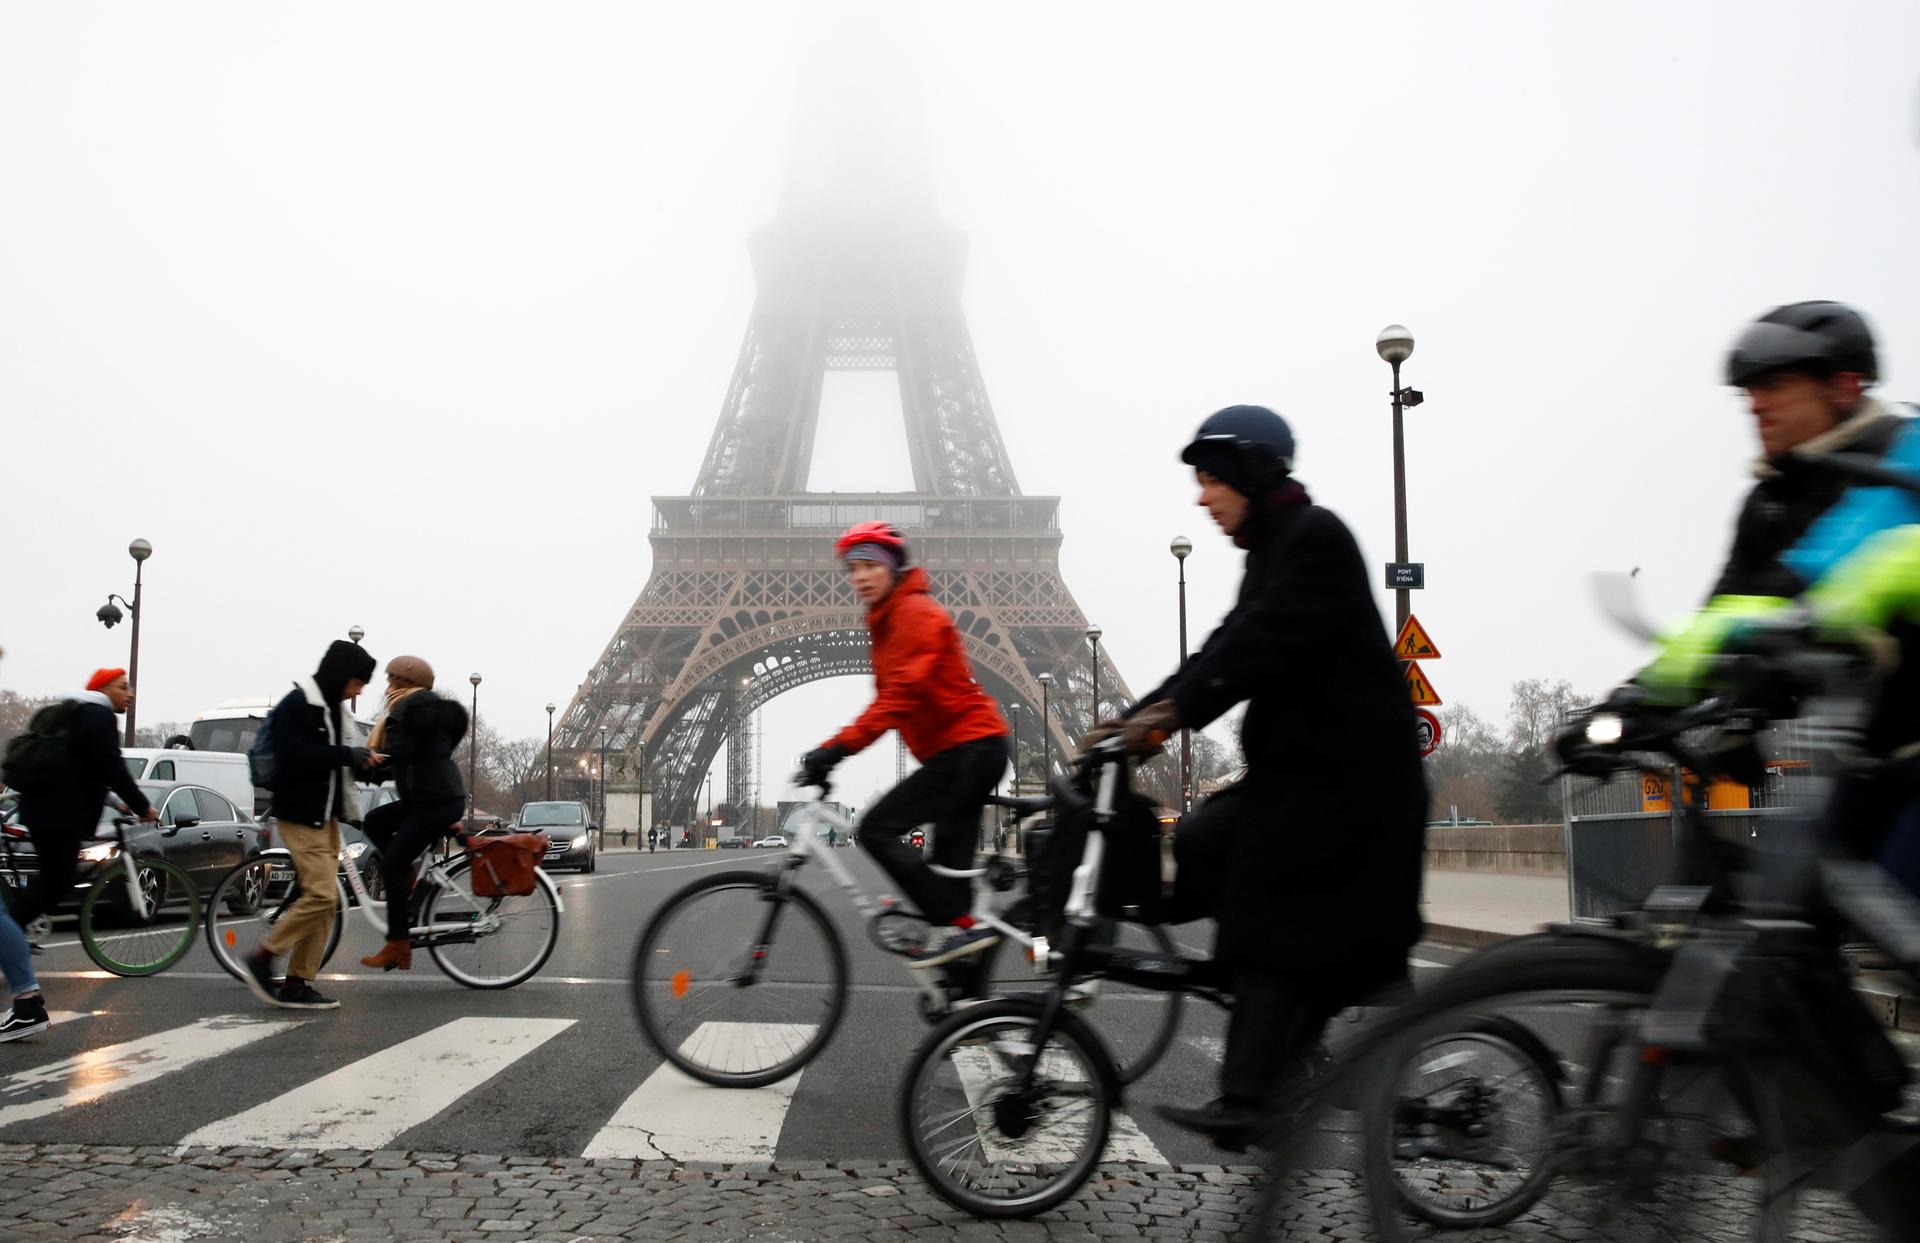 Several people are shown riding bicycles and crossing the street near the Eiffel Tower during a strike by all unions of the Paris transport network.